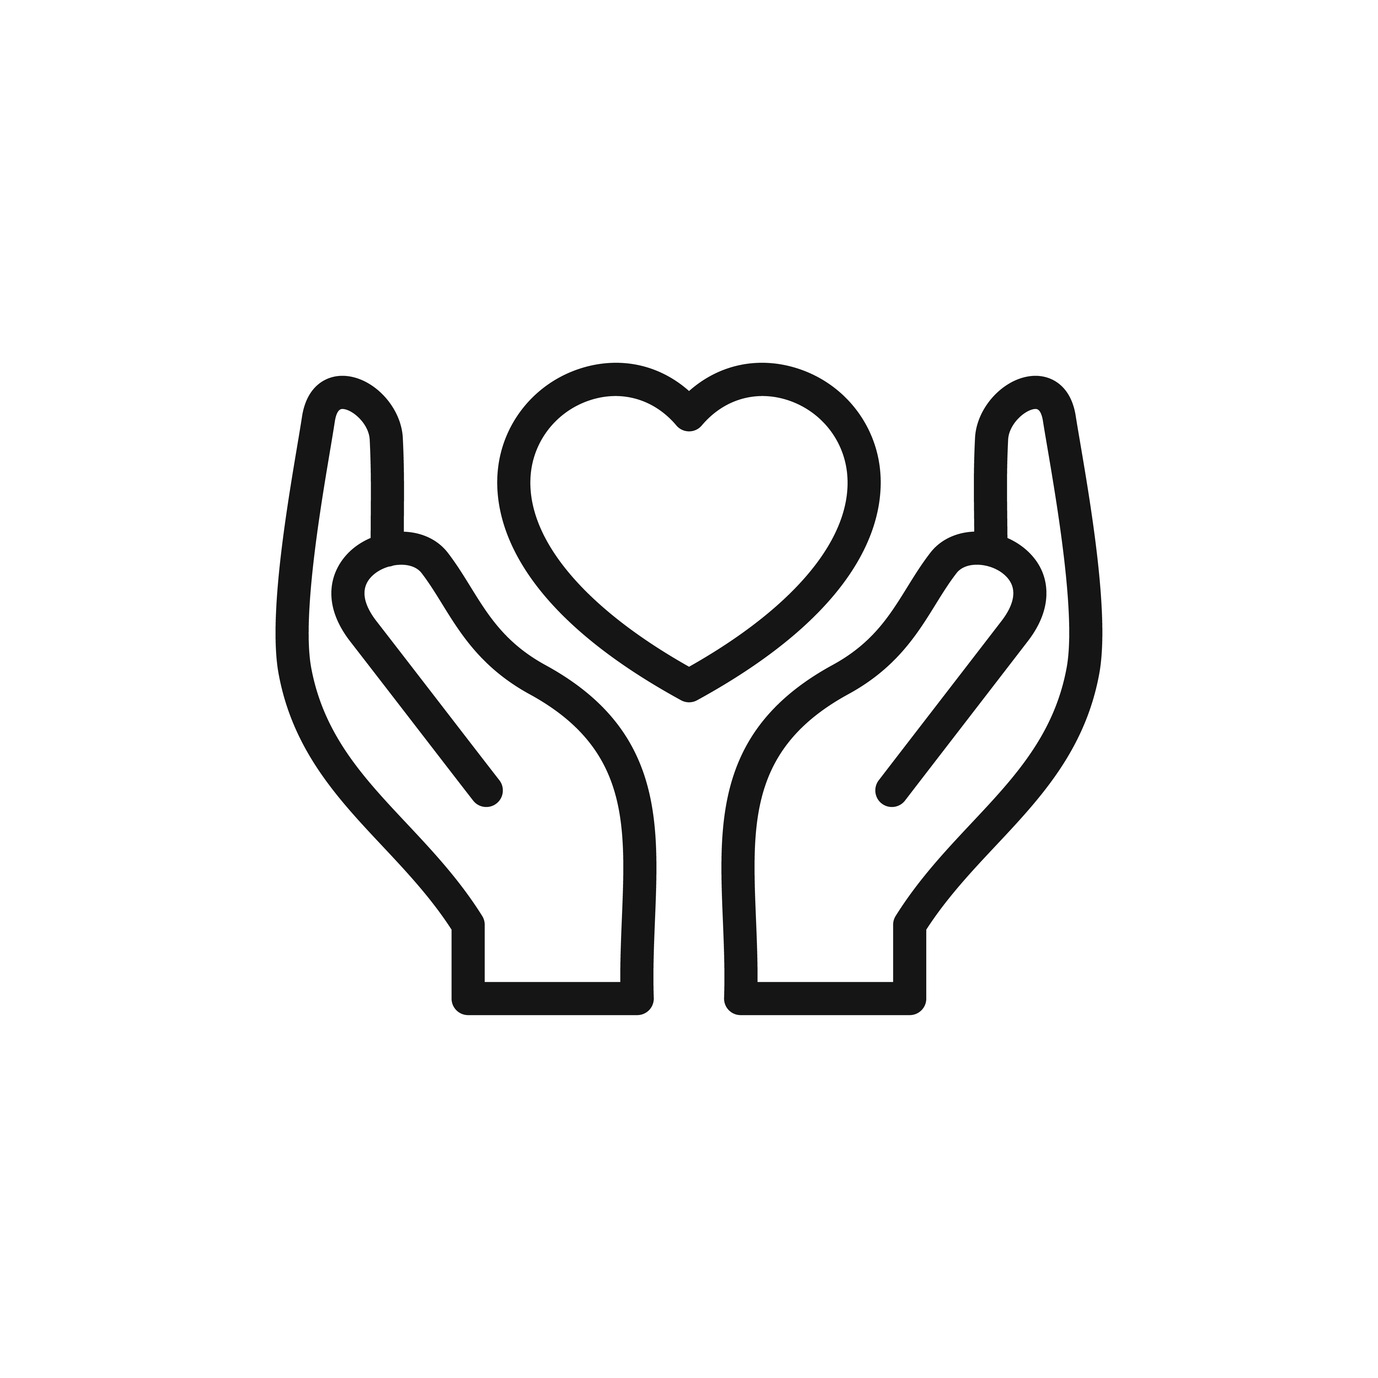 hands holding heart icon illustration - Ventura Counseling and Wellness ...